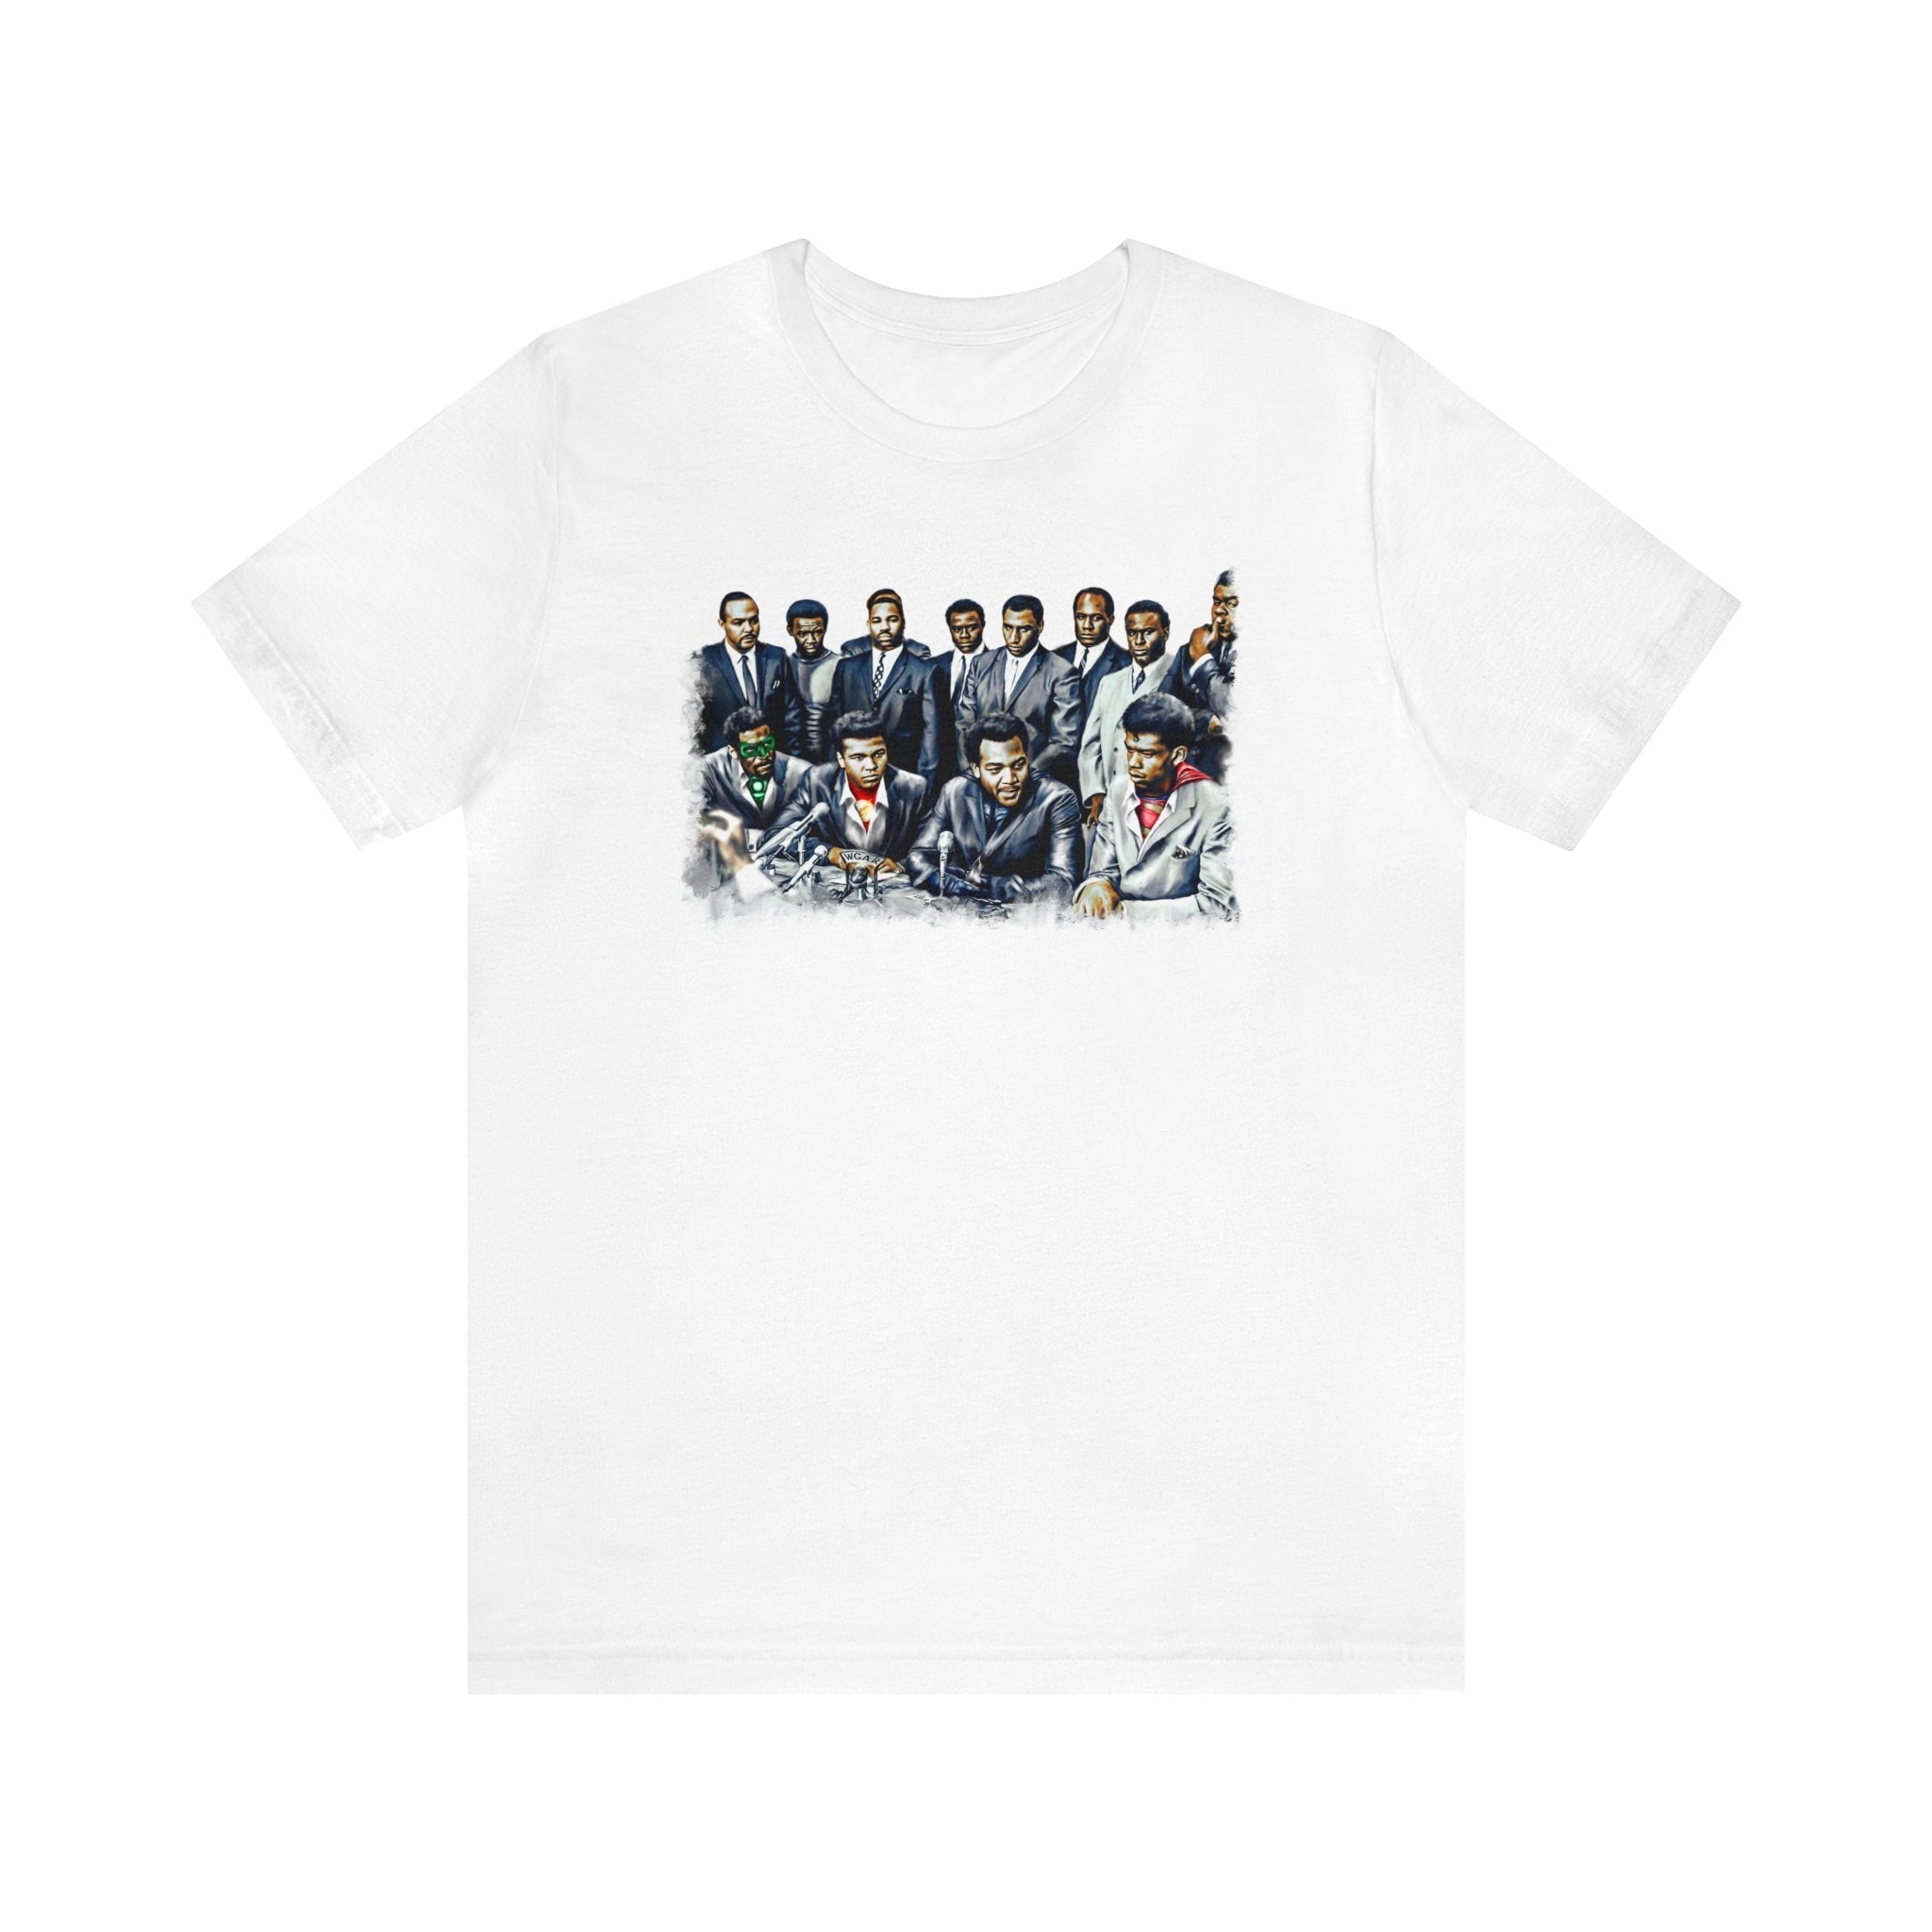 Social Justice League | Unisex T-shirt - Androo's Art